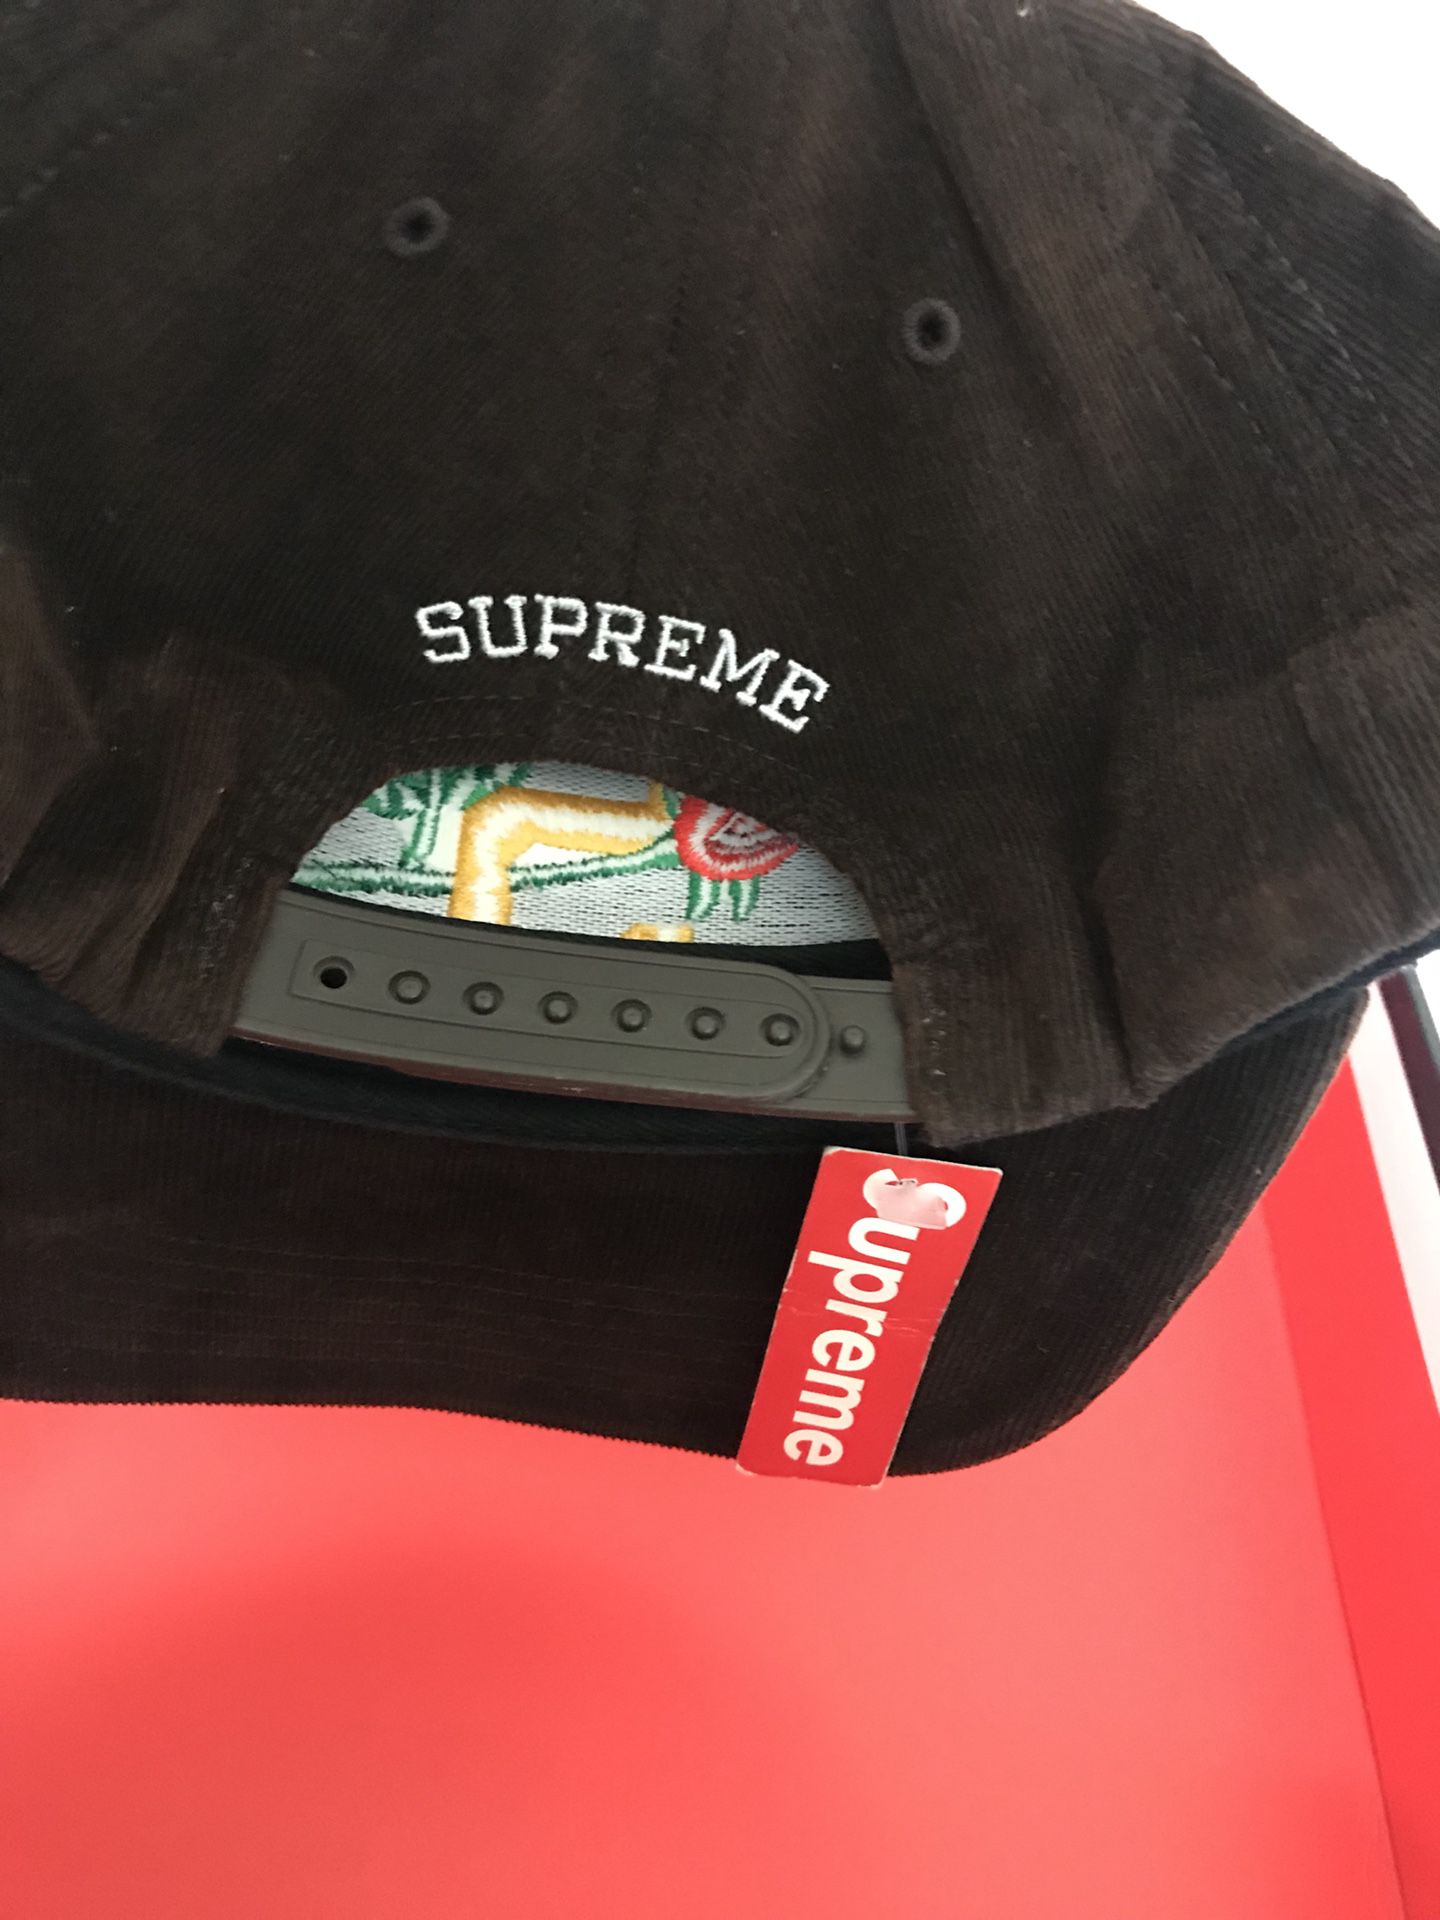 Supreme rose cord hat 5 Panel SnapBack for Sale in Los Angeles, CA